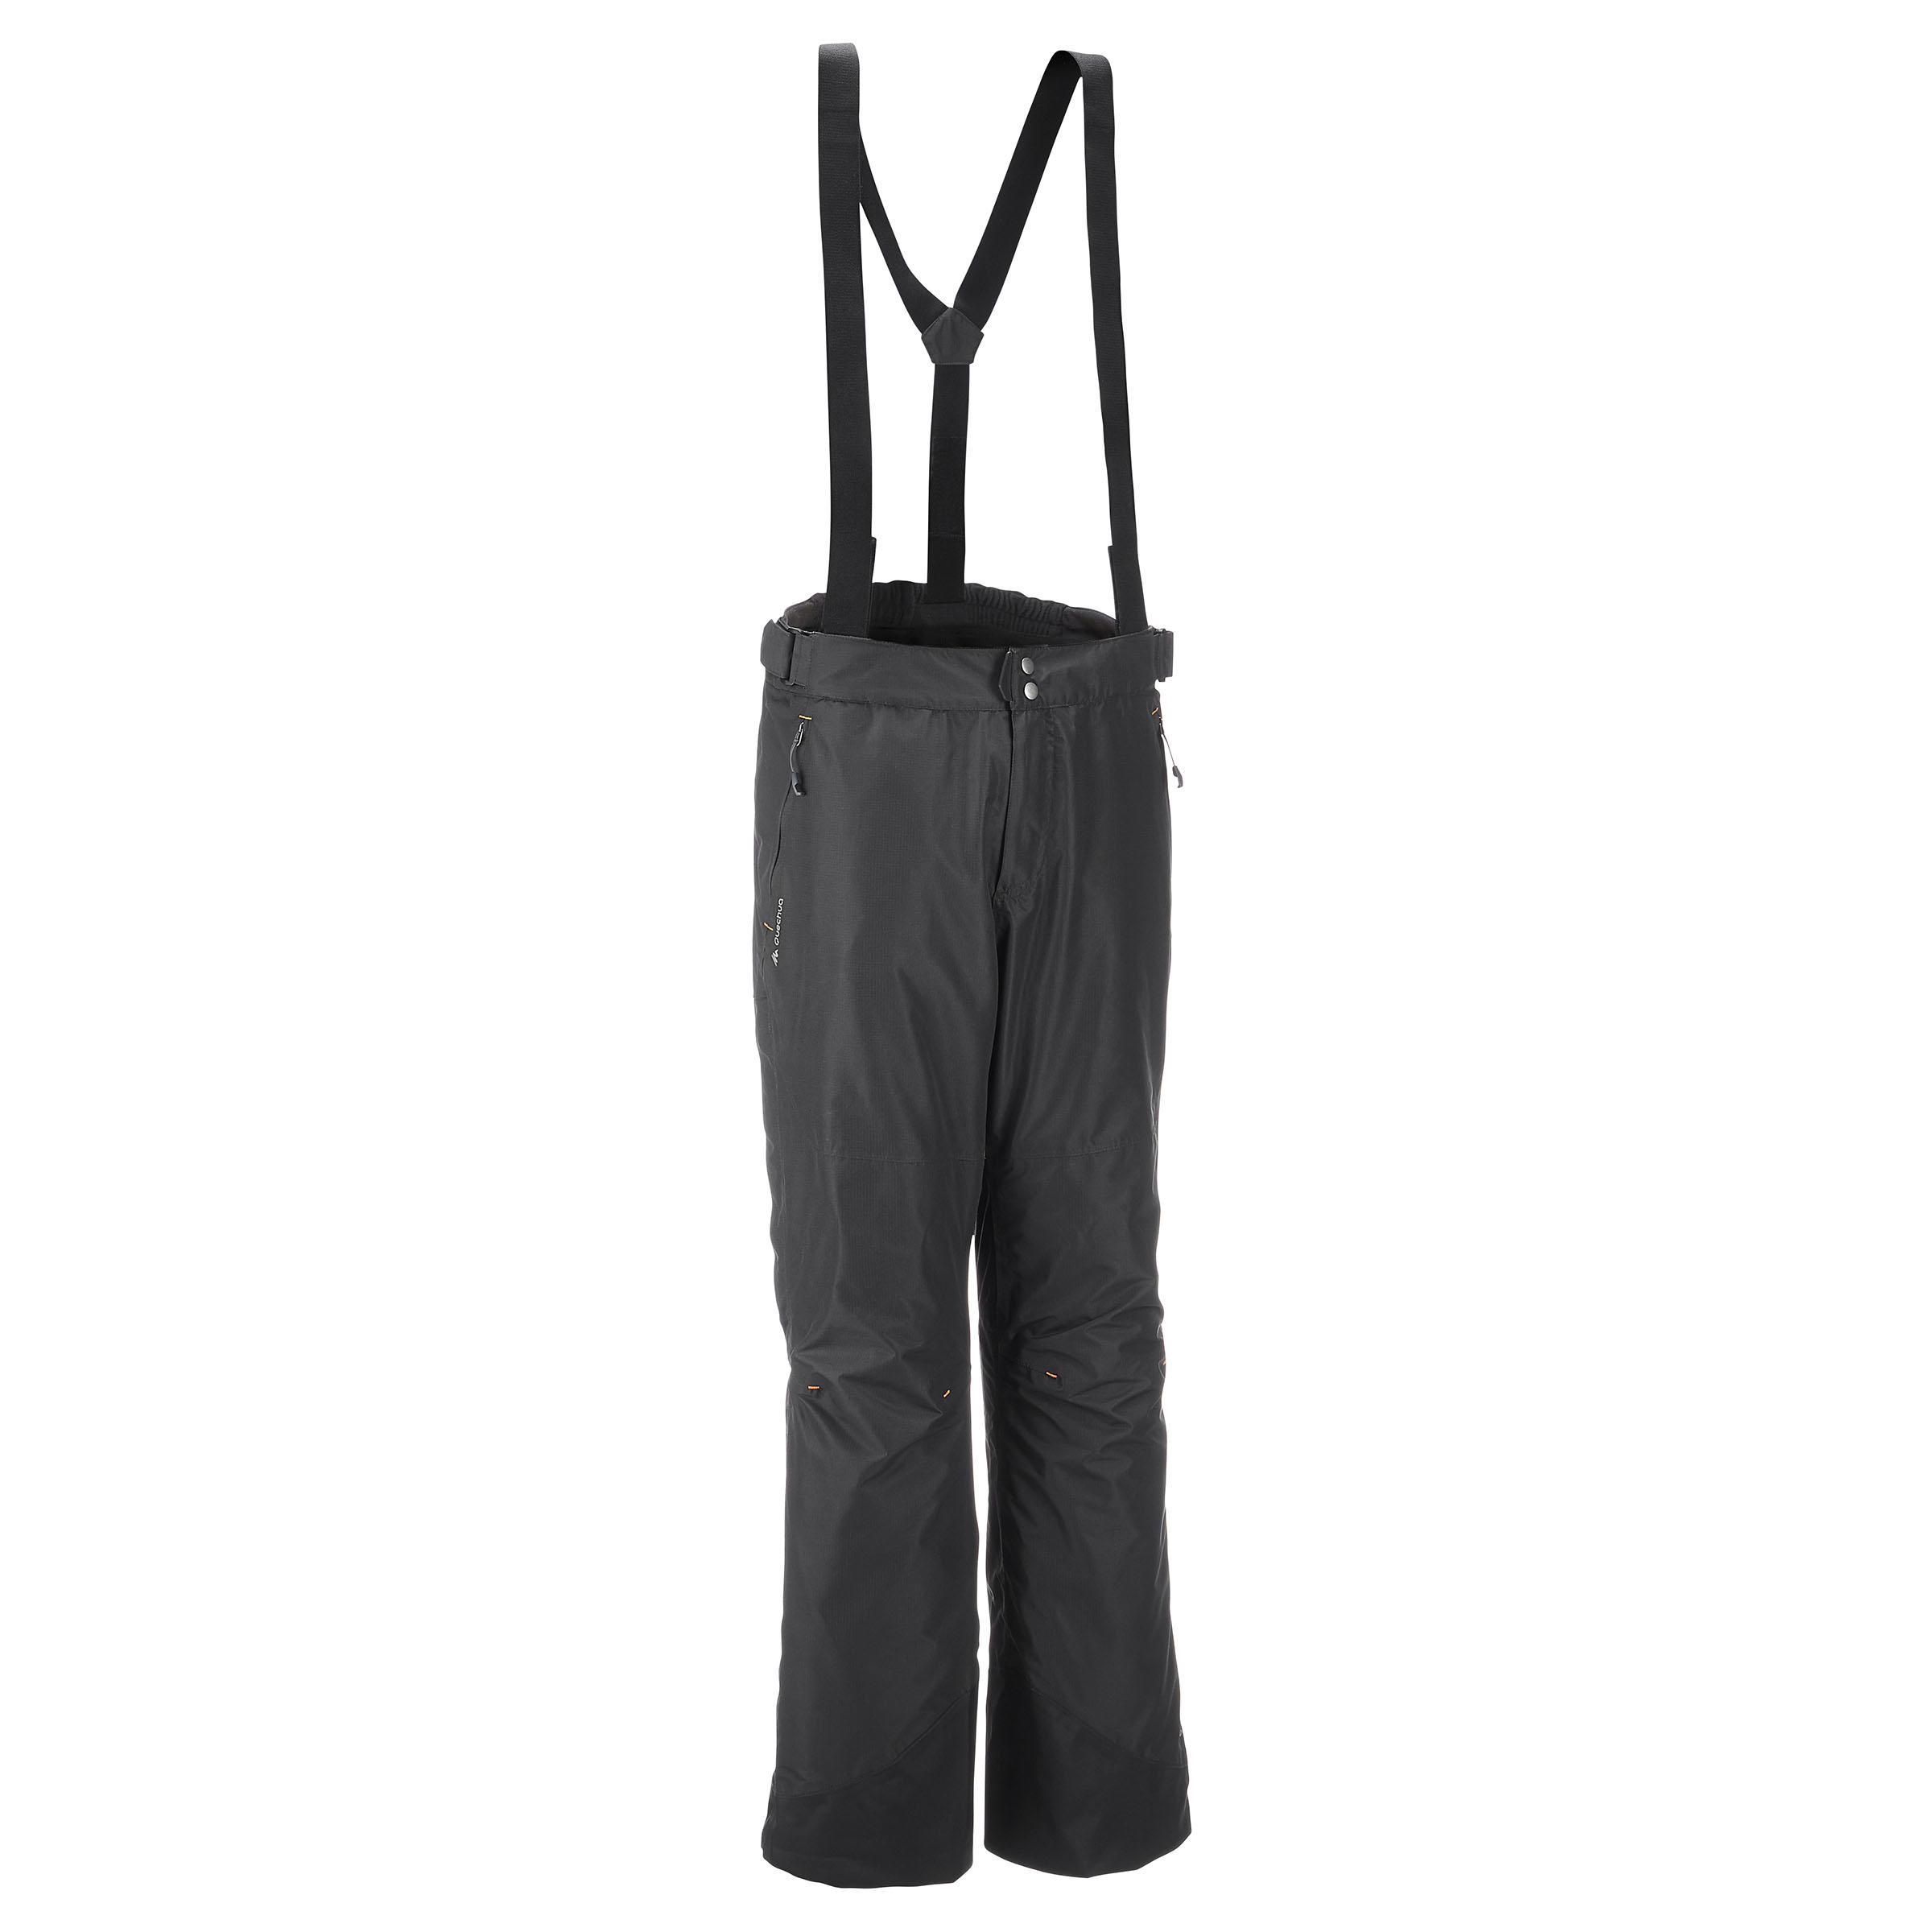 Best Black Cargo Pants 6 Best Black Cargo Pants for Men and Women at Best  Prices  The Economic Times